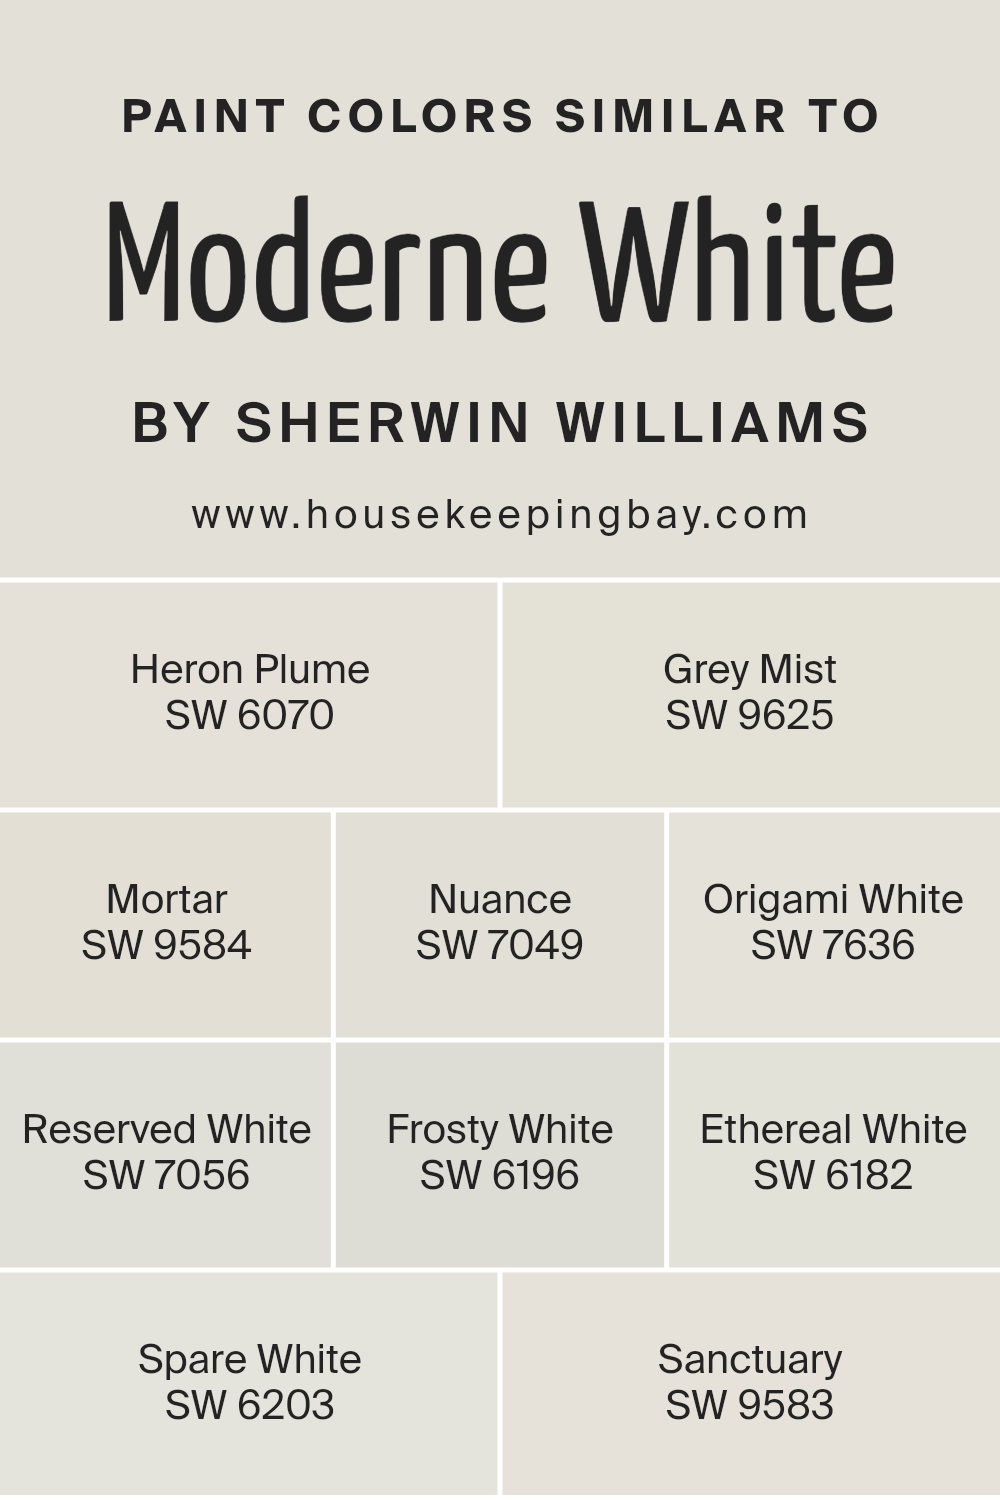 colors_similar_to_moderne_white_sw_6168